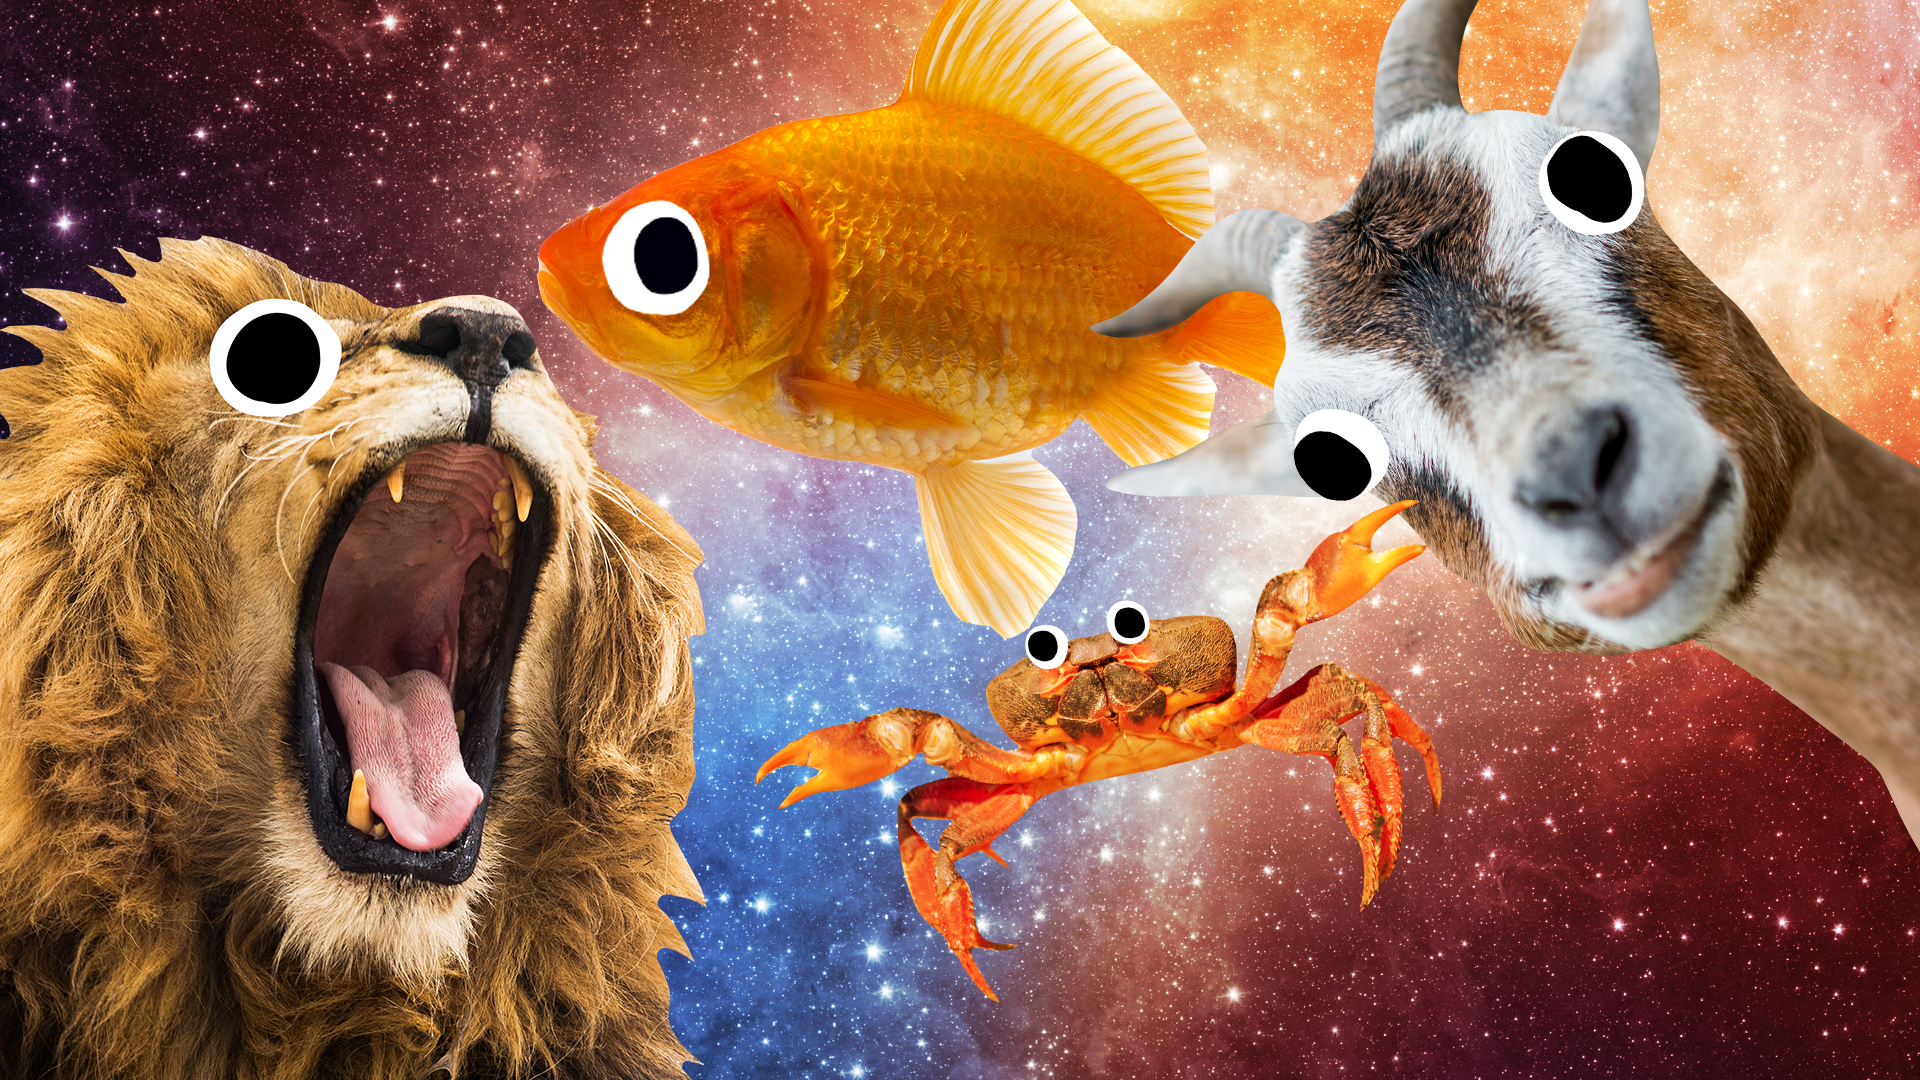 Beano star sign animals on space background